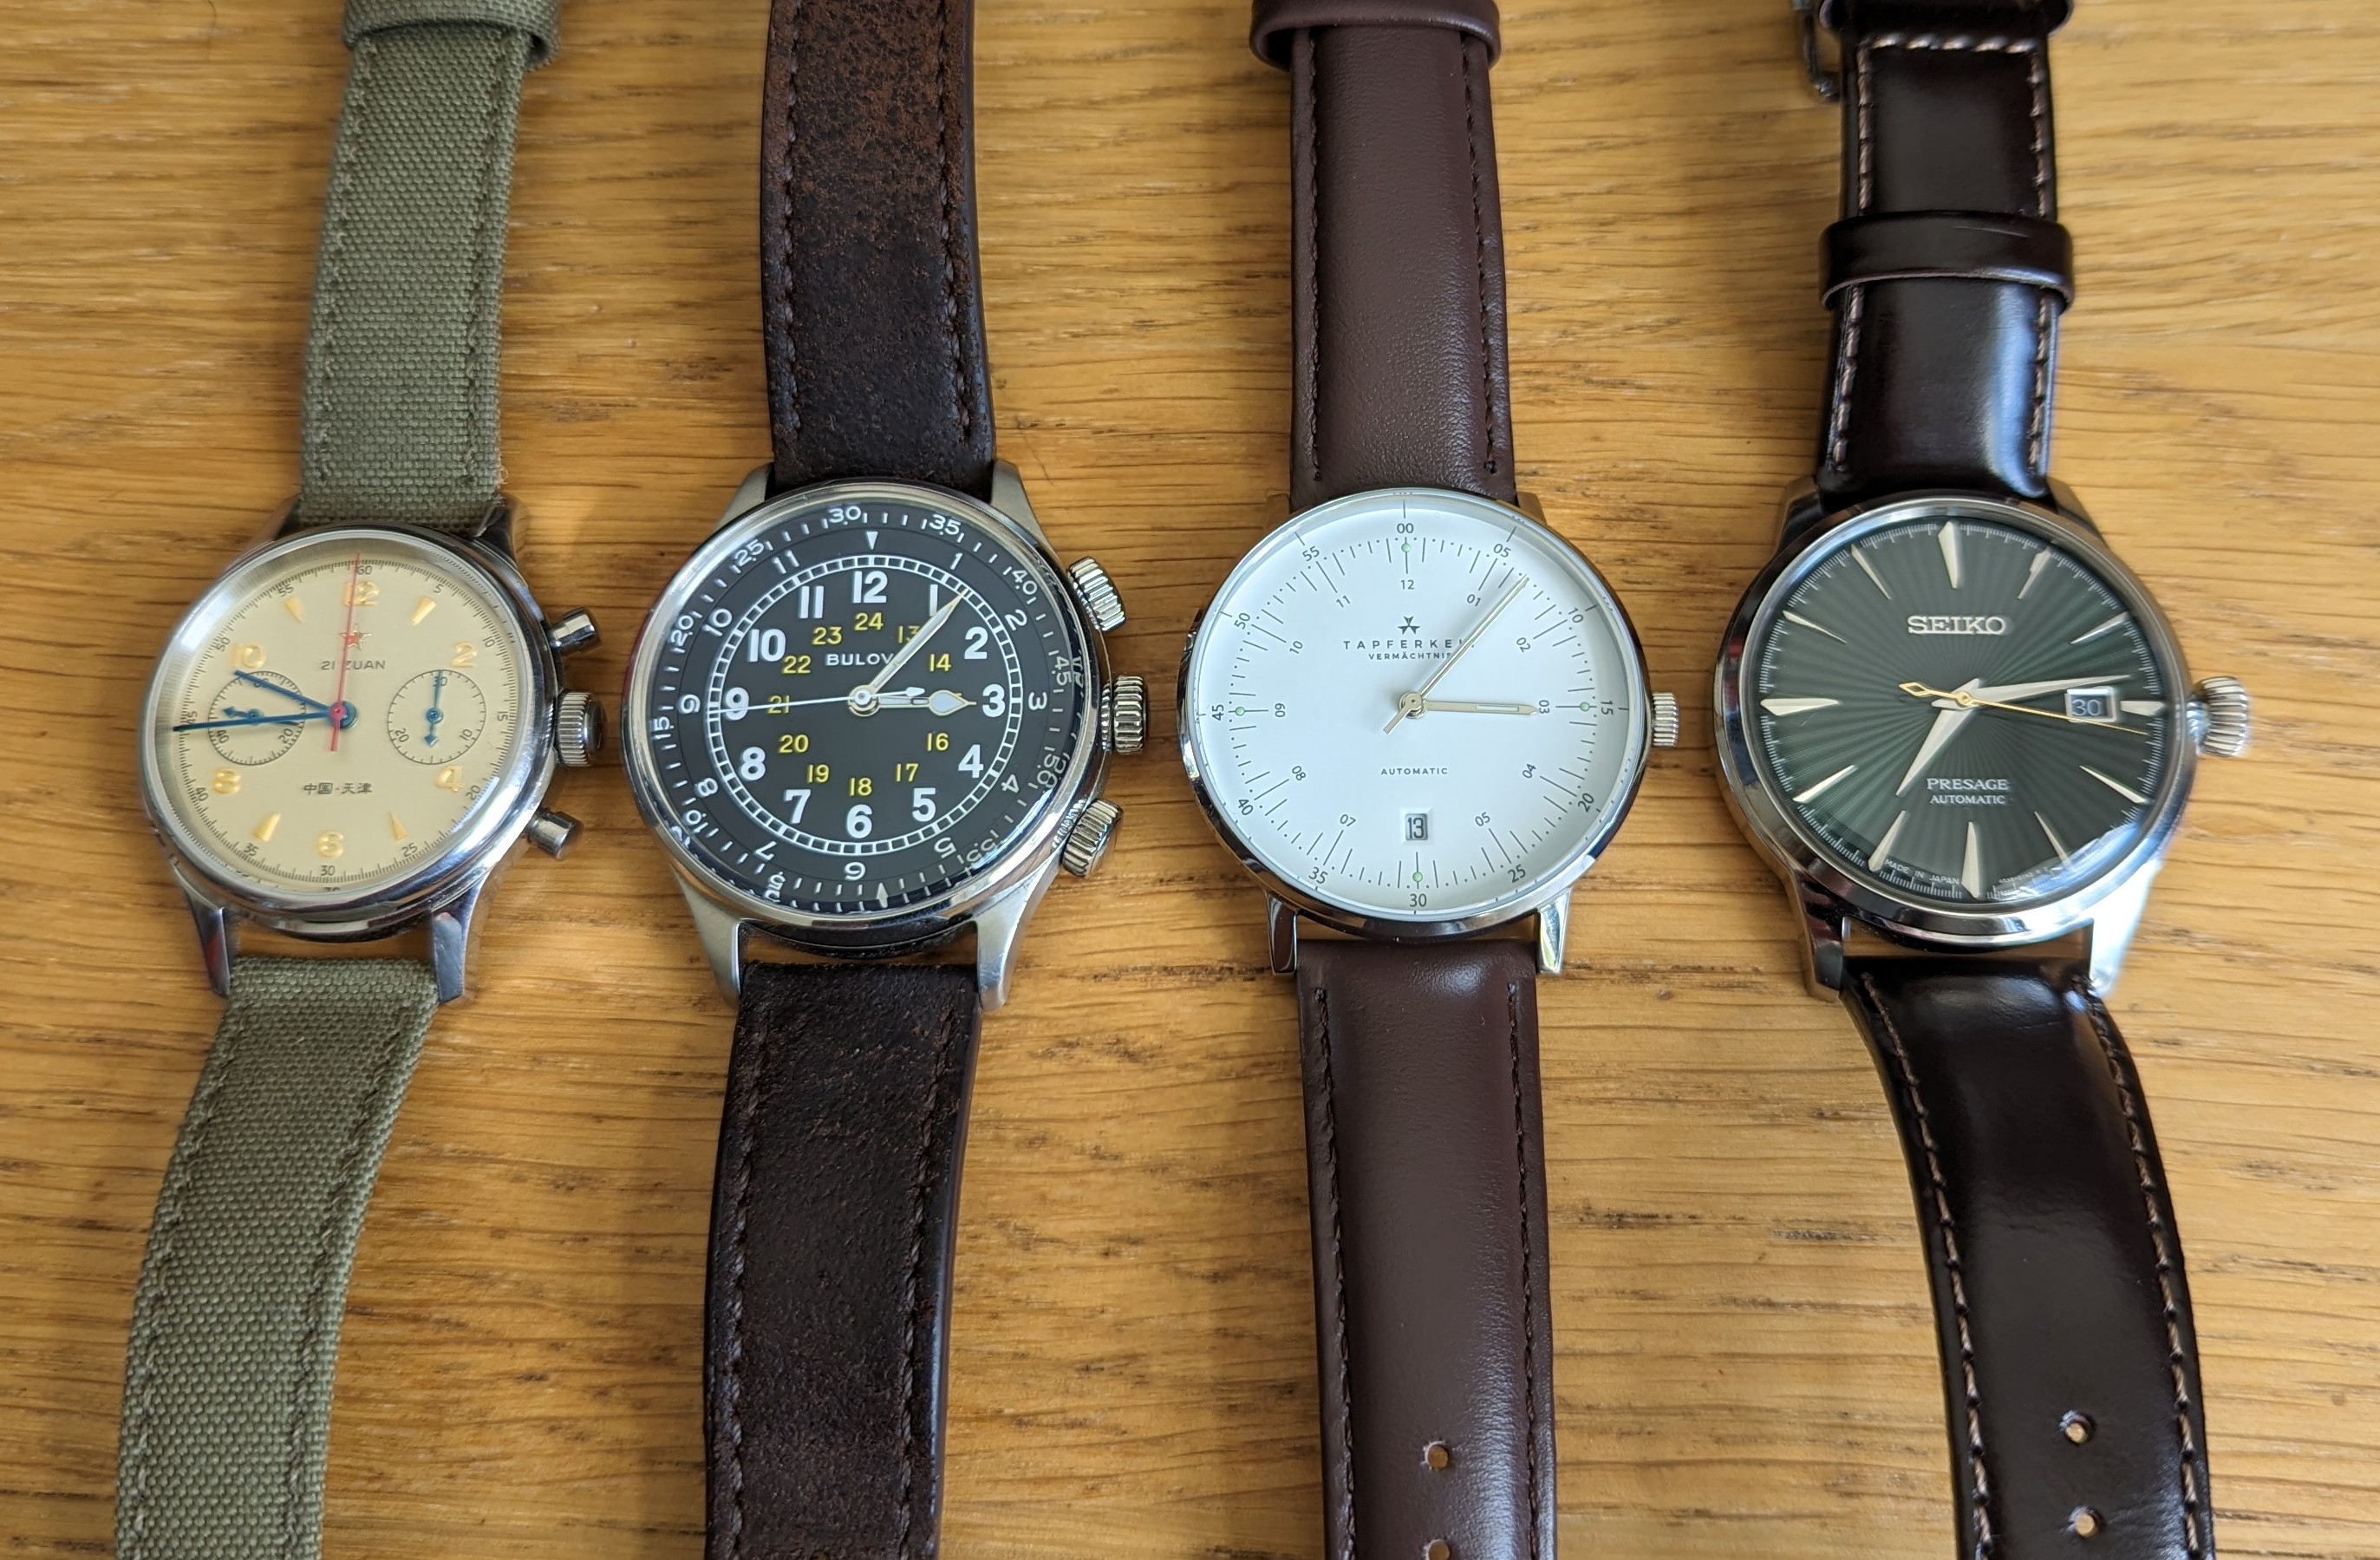 My collection of 4 mechanical watches lying face-up on my desk